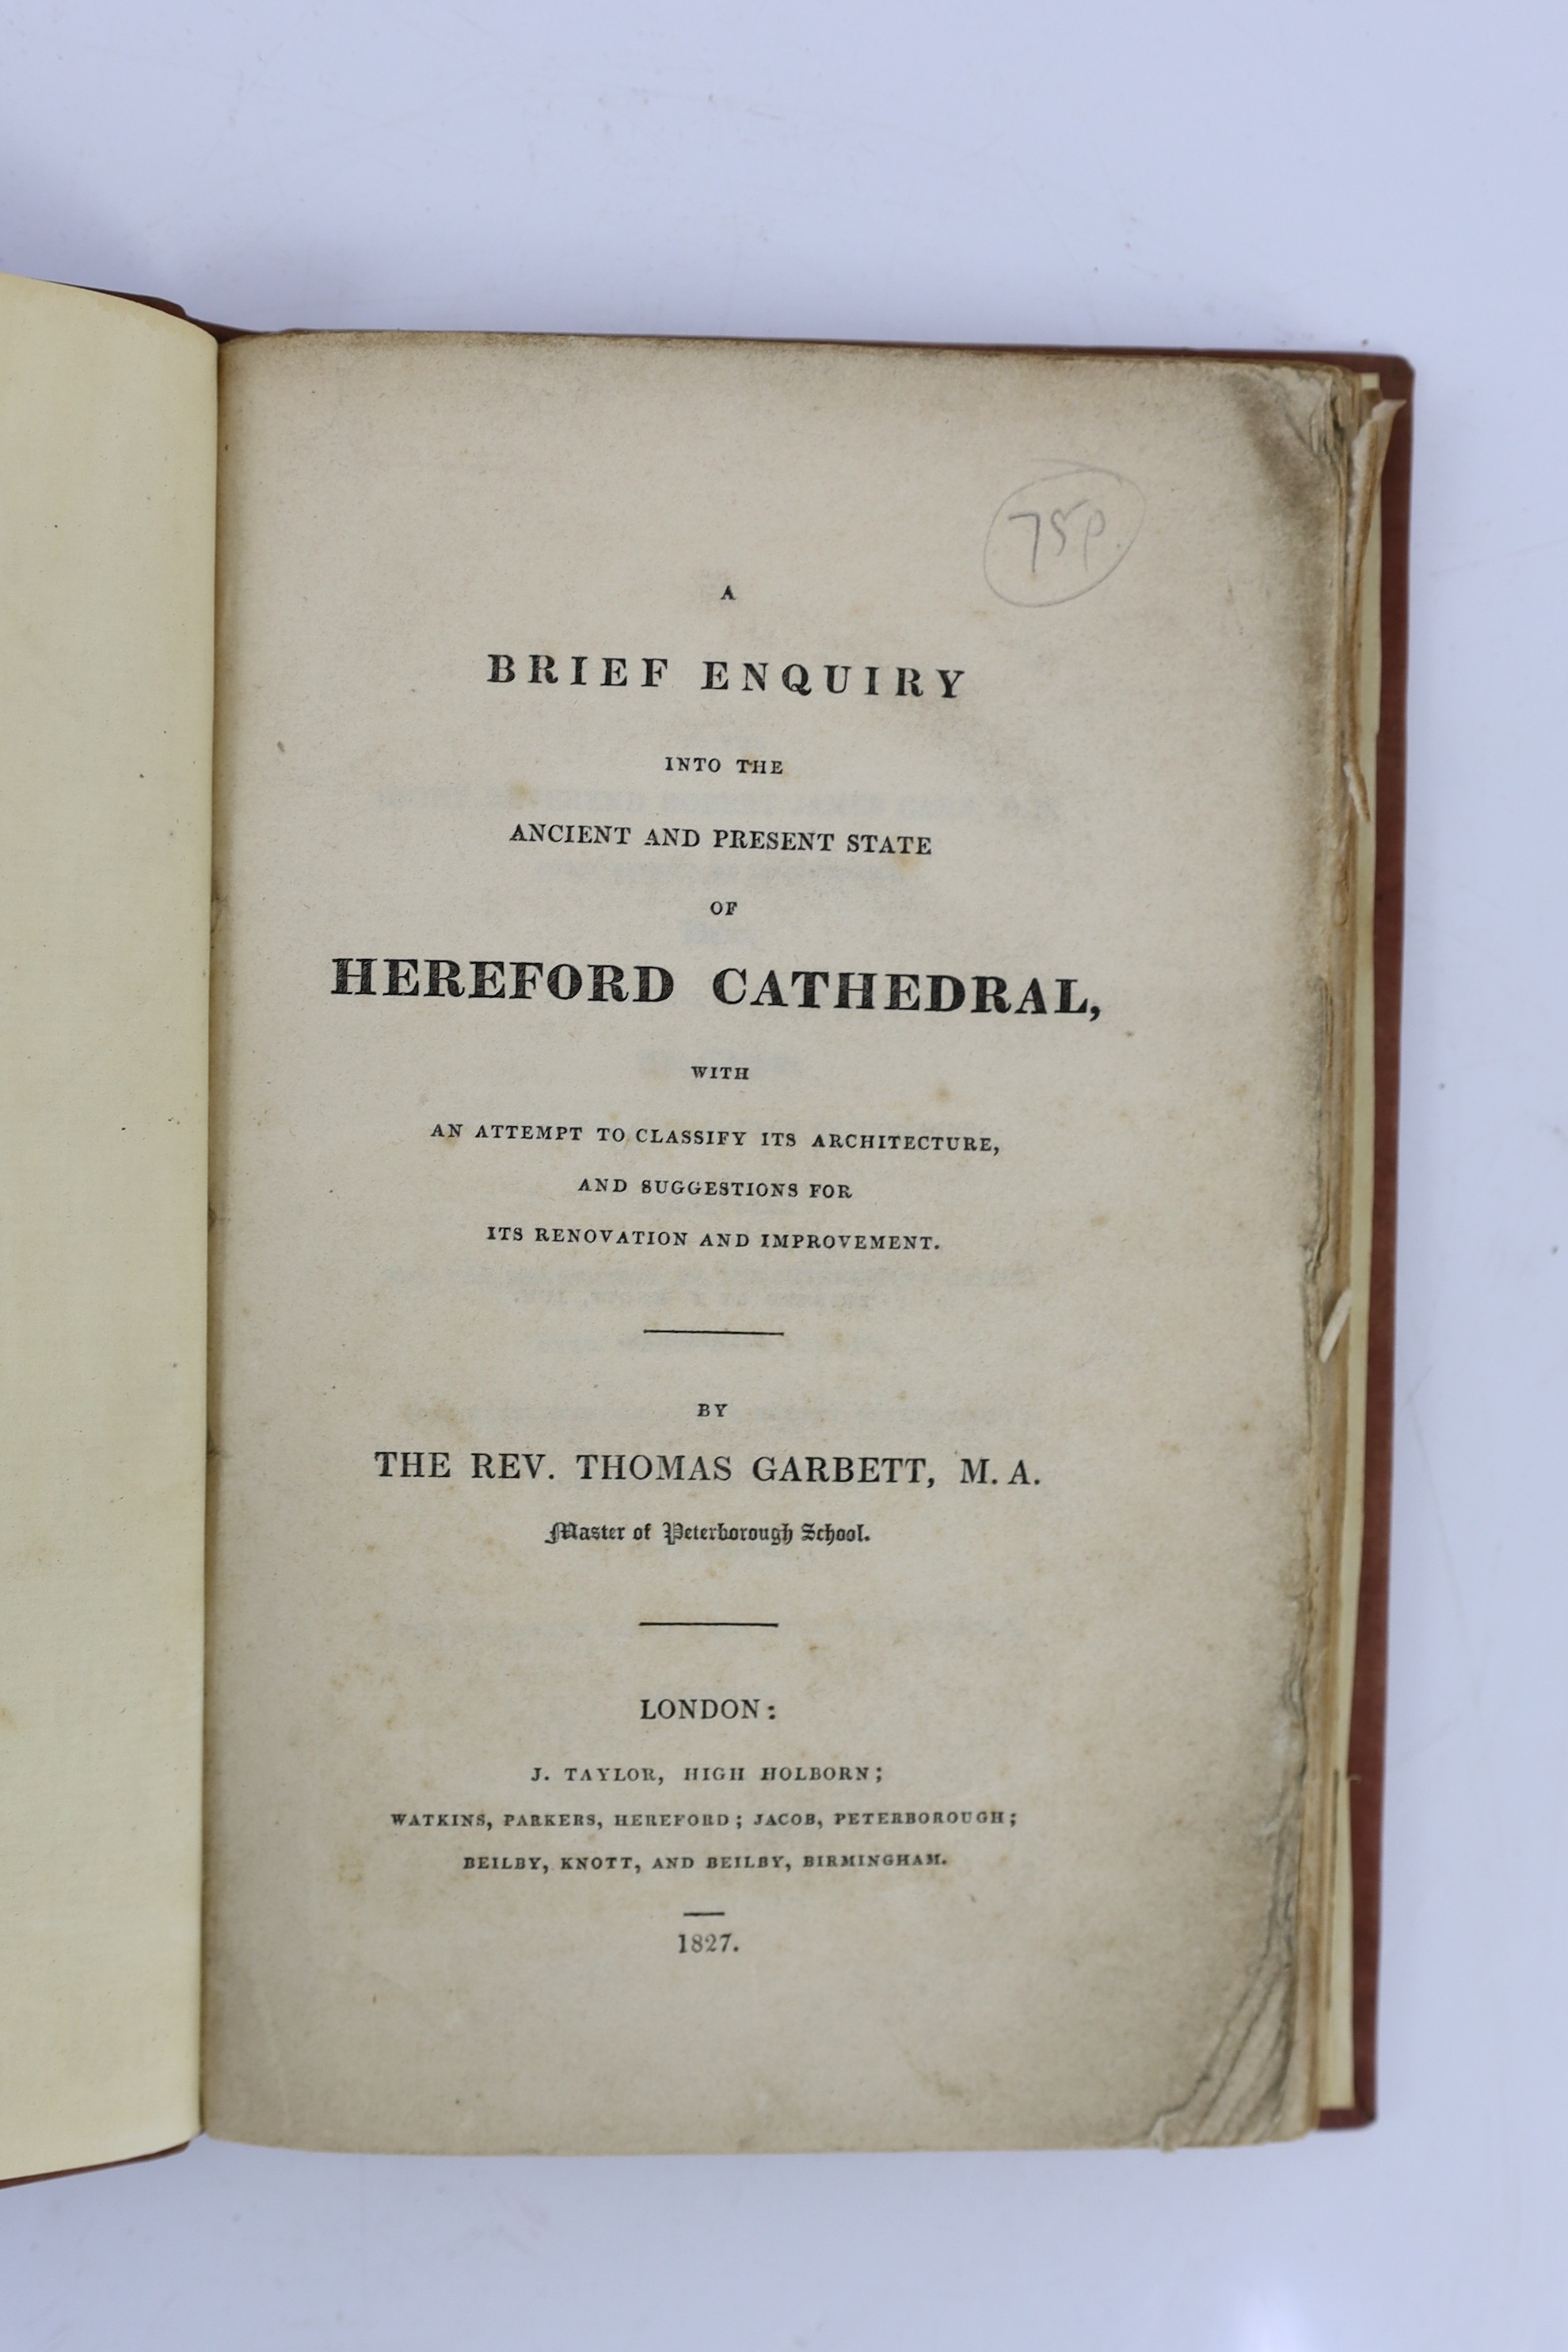 HEREFORDS: Lodge, Rev. John - Introductory Sketches towards a Topographical History, of the County of Hereford.